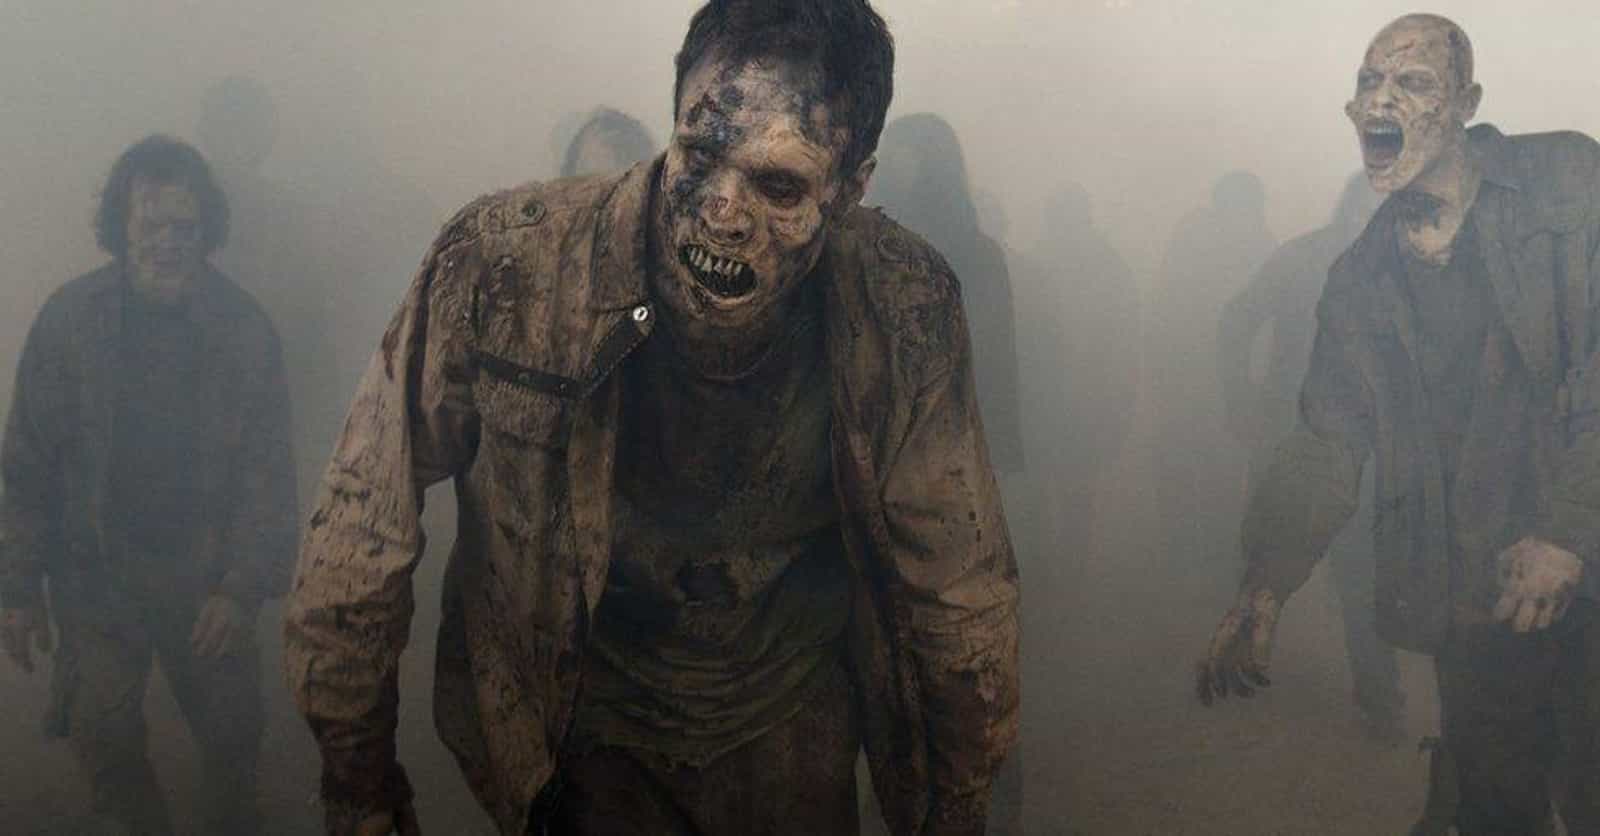 Special Effects Secrets From Behind The Scenes Of 'The Walking Dead'